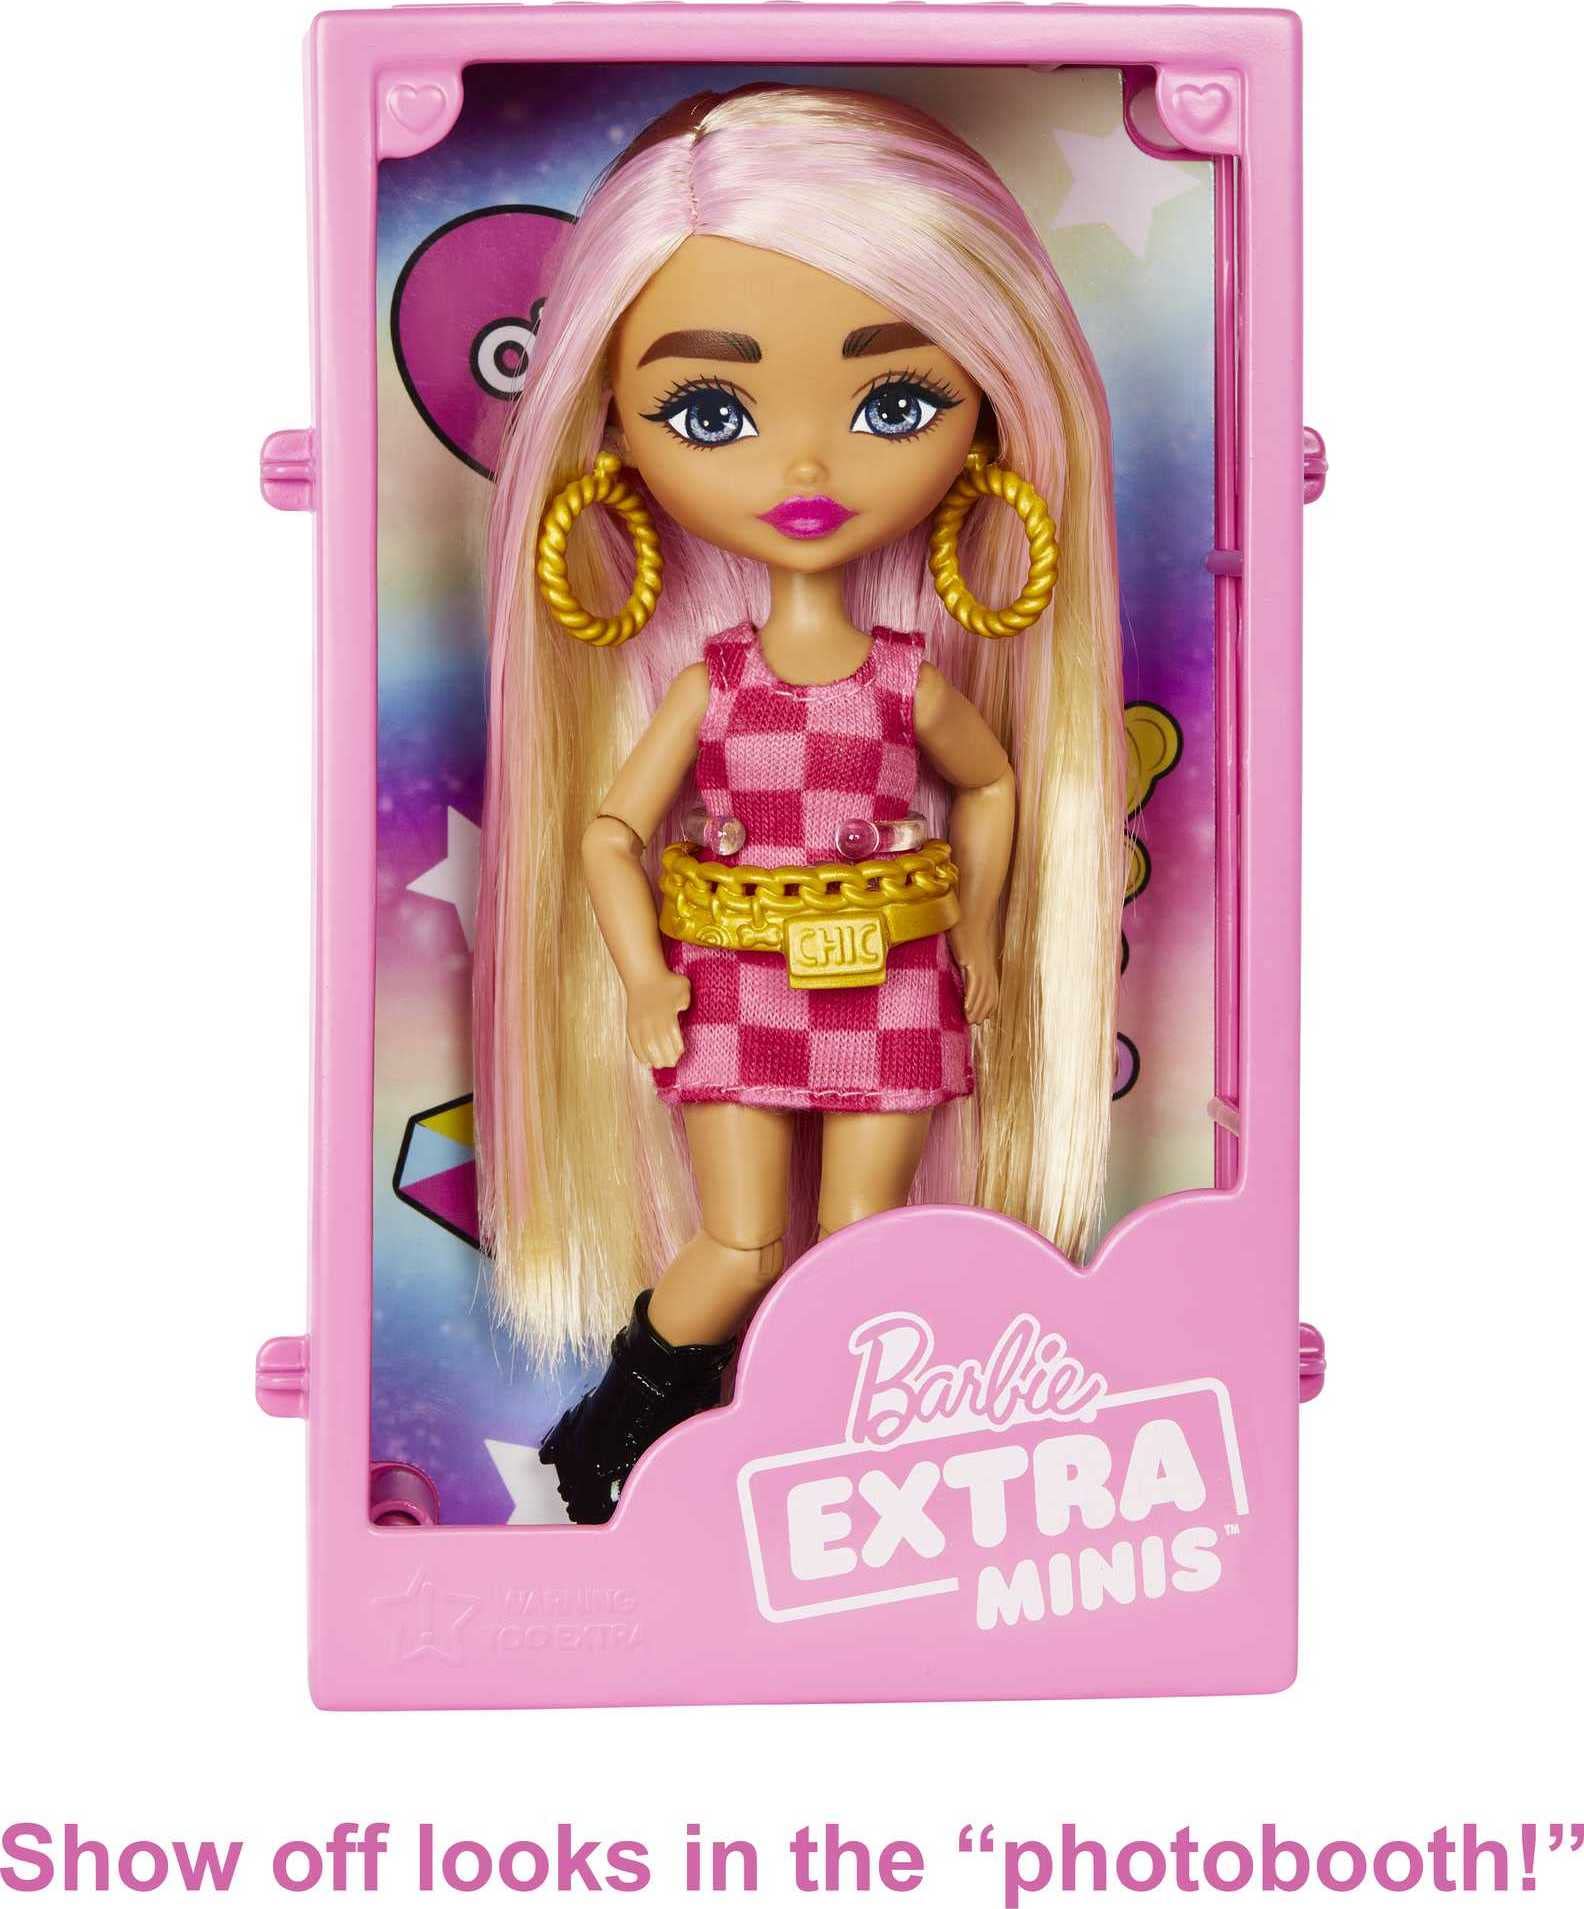 Barbie Extra Minis Doll and Fashion Playset with 15+ Pieces, Boutique with Small Doll, Clothes and Accessories